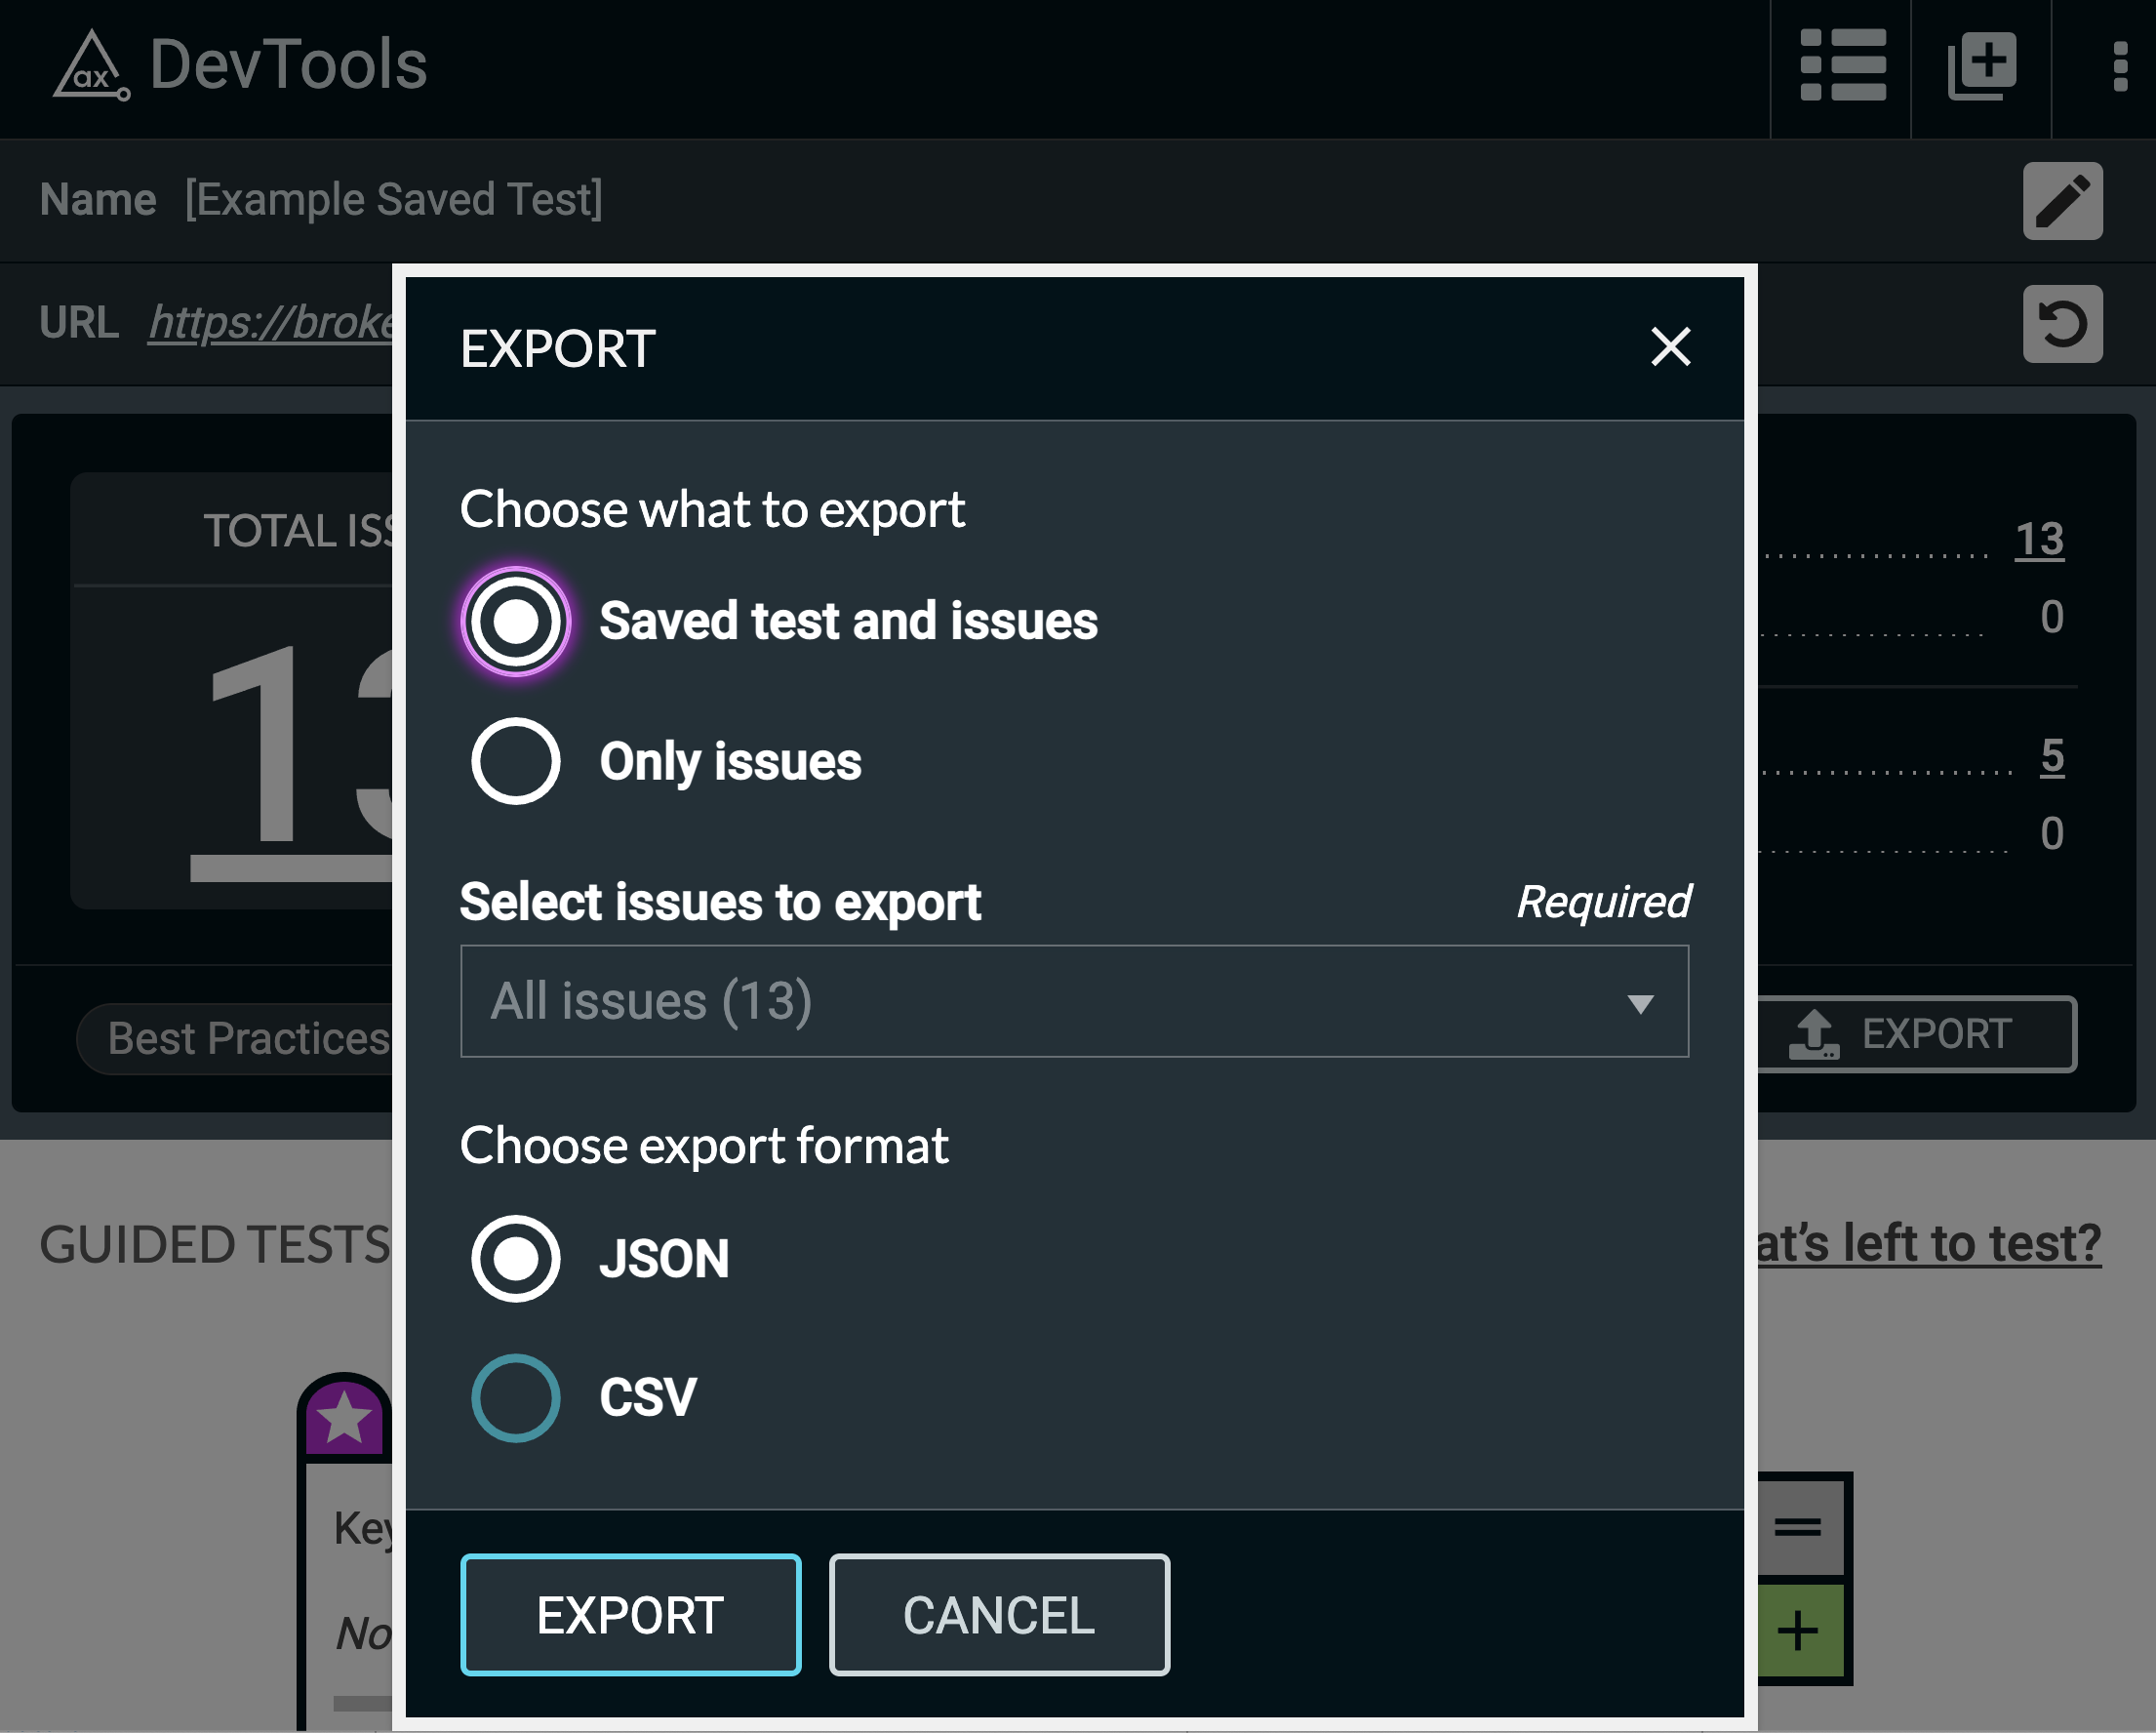 Screenshot of the Export modal in the axe DevTools extension highlighting the new option for Pro users to export "Saved test and issues".